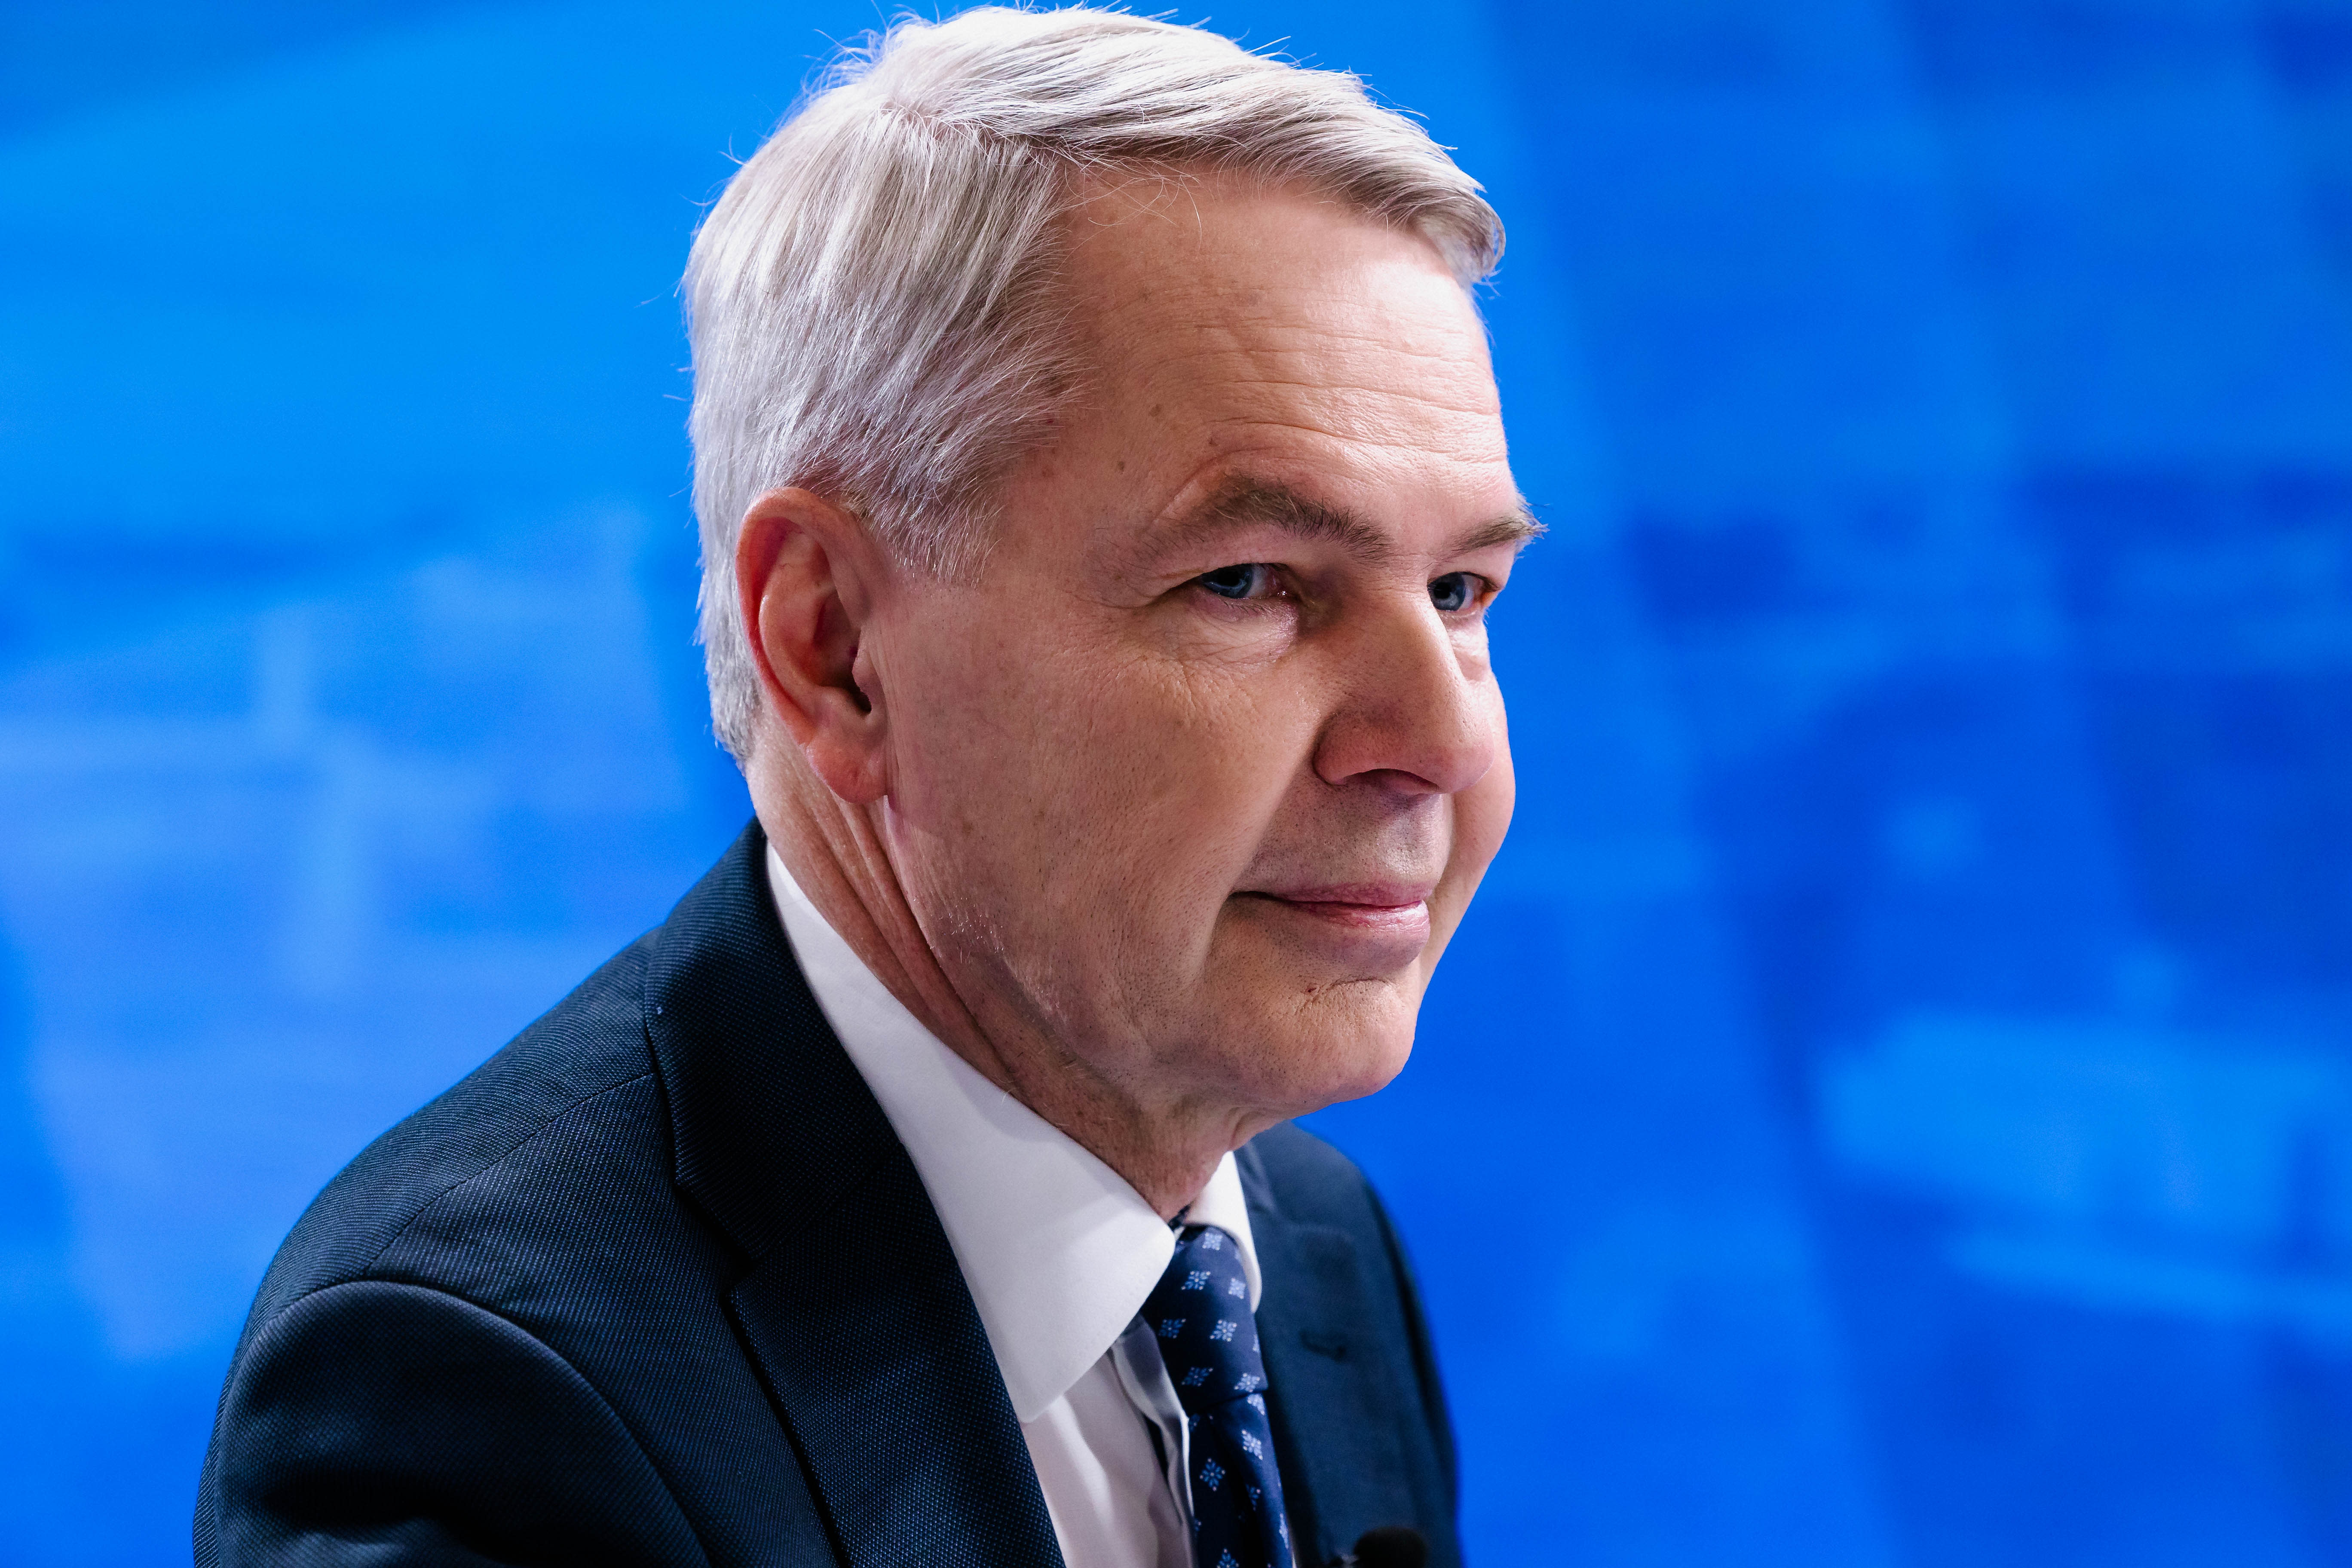 Foreign Minister Haavisto: The road to NATO is still open for Finland and Sweden